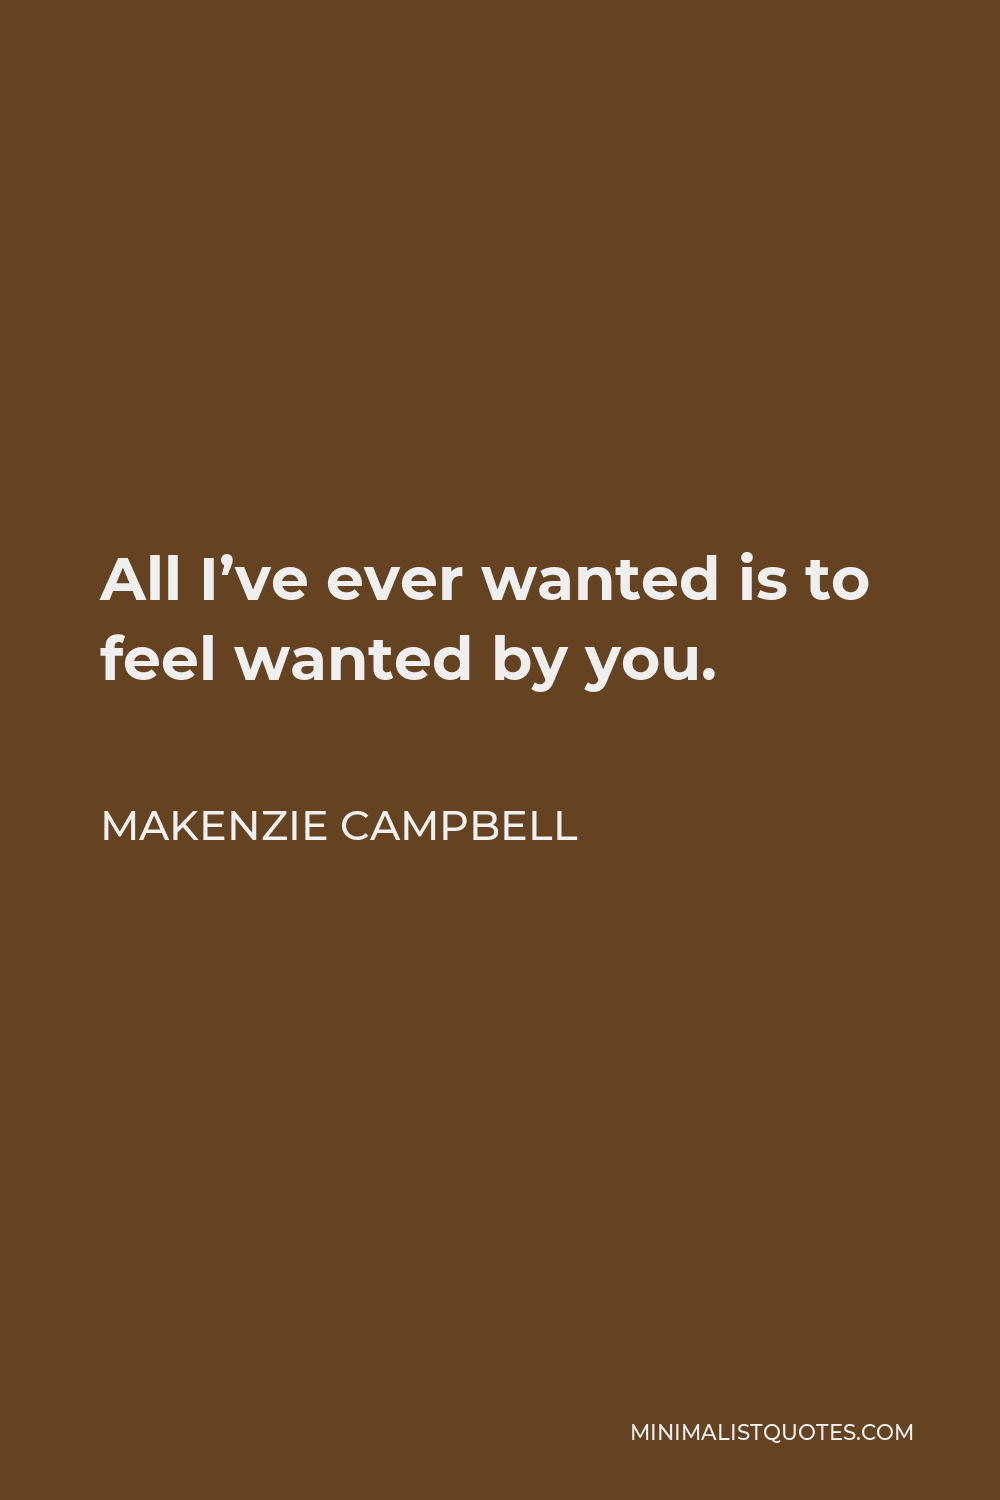 Makenzie Campbell Quote - All I’ve ever wanted is to feel wanted by you.